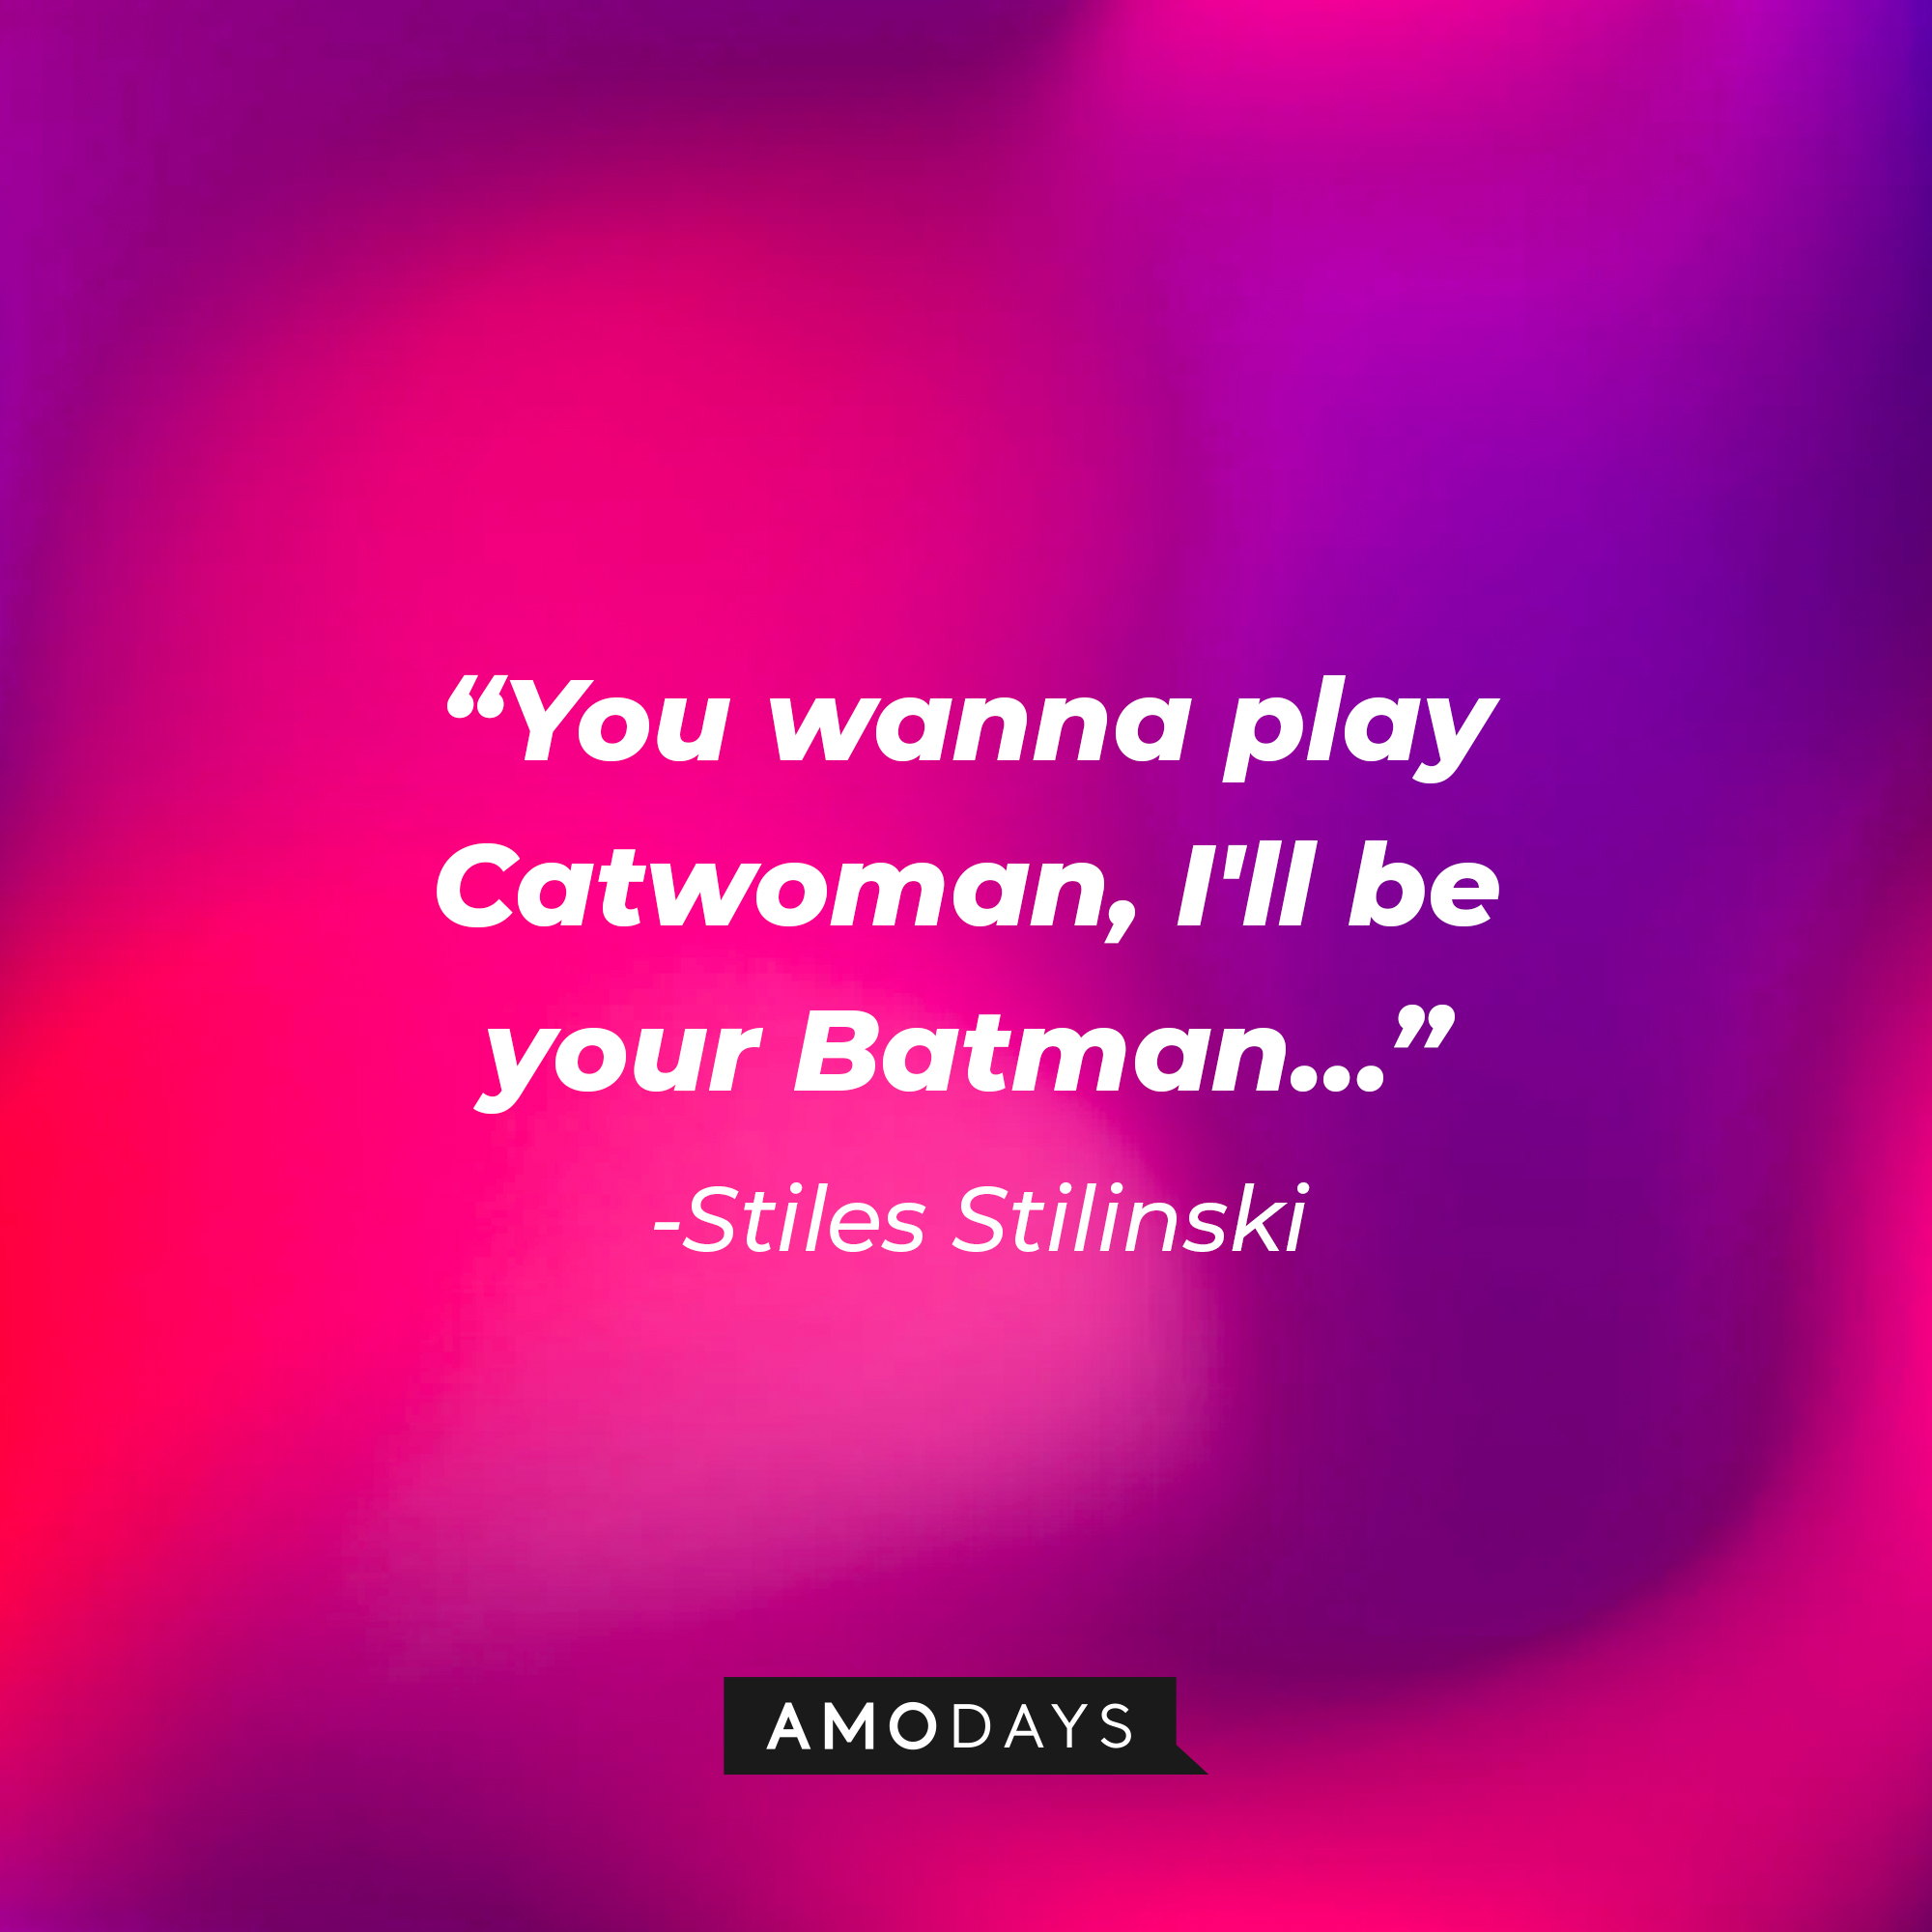 Stiles Stilinski's quote: "You wanna play Catwoman, I'll be your Batman…" | Image: AmoDays